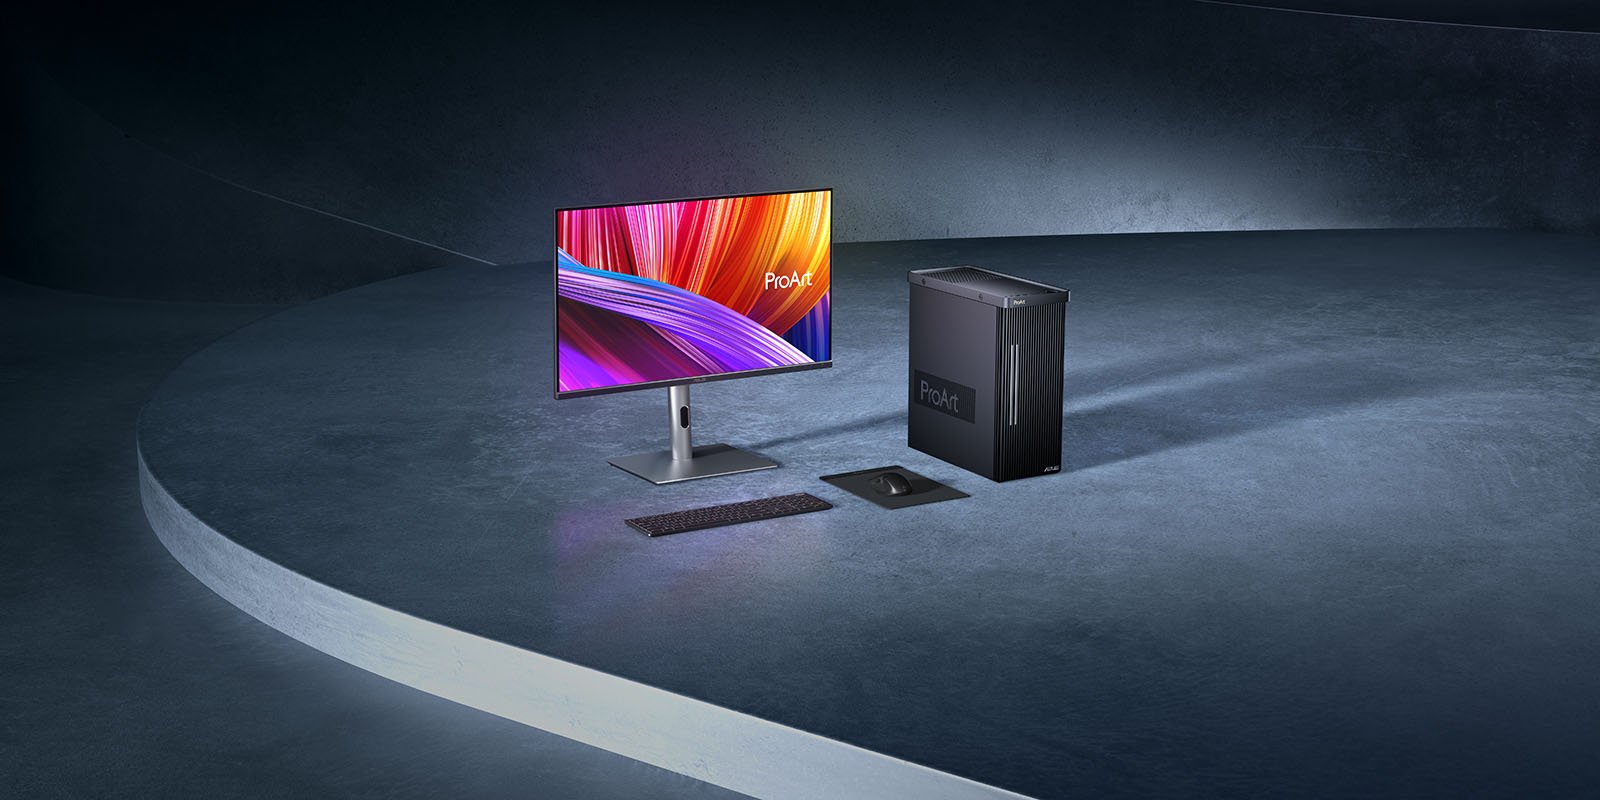 The Asus ProArt Station with a monitor, keyboard, and mouse.